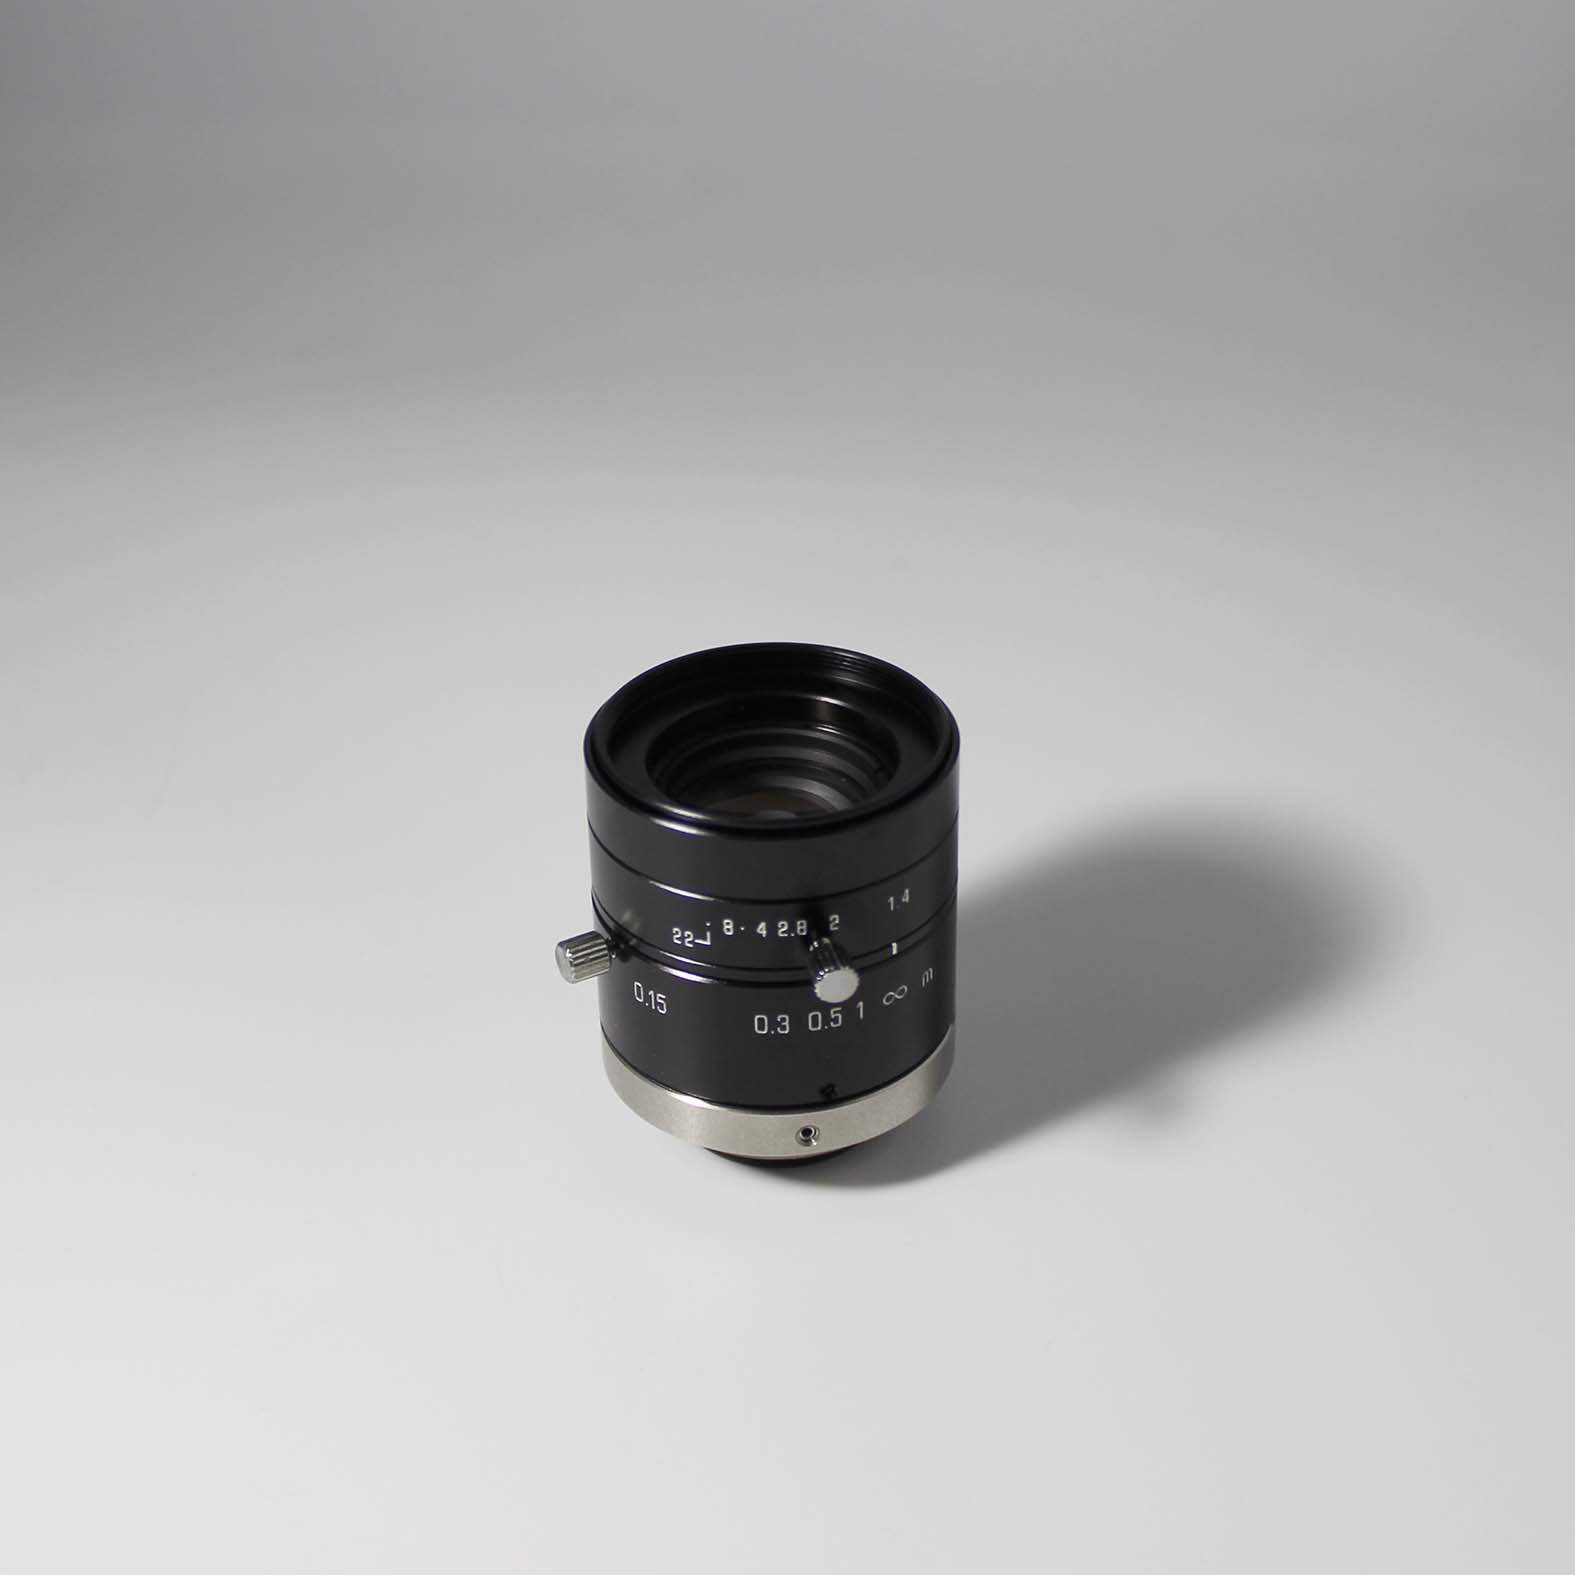 China Supplier Factory Prices 23FM16SP Camera Tamron Lens